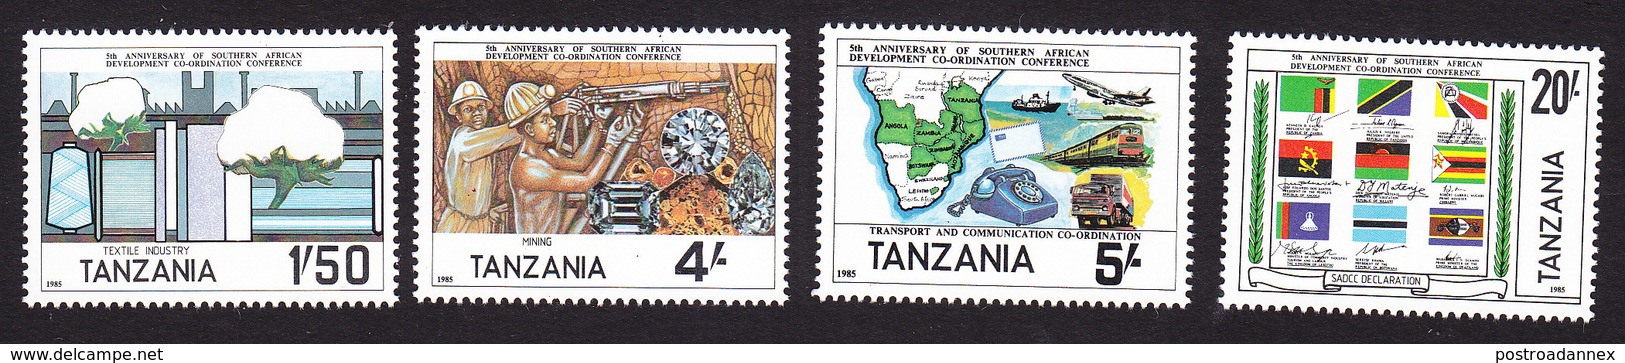 Tanzania, Scott #254-257, Mint Hinged, Southern Africa Development Coordination Conference, Issued 1985 - Tanzanie (1964-...)